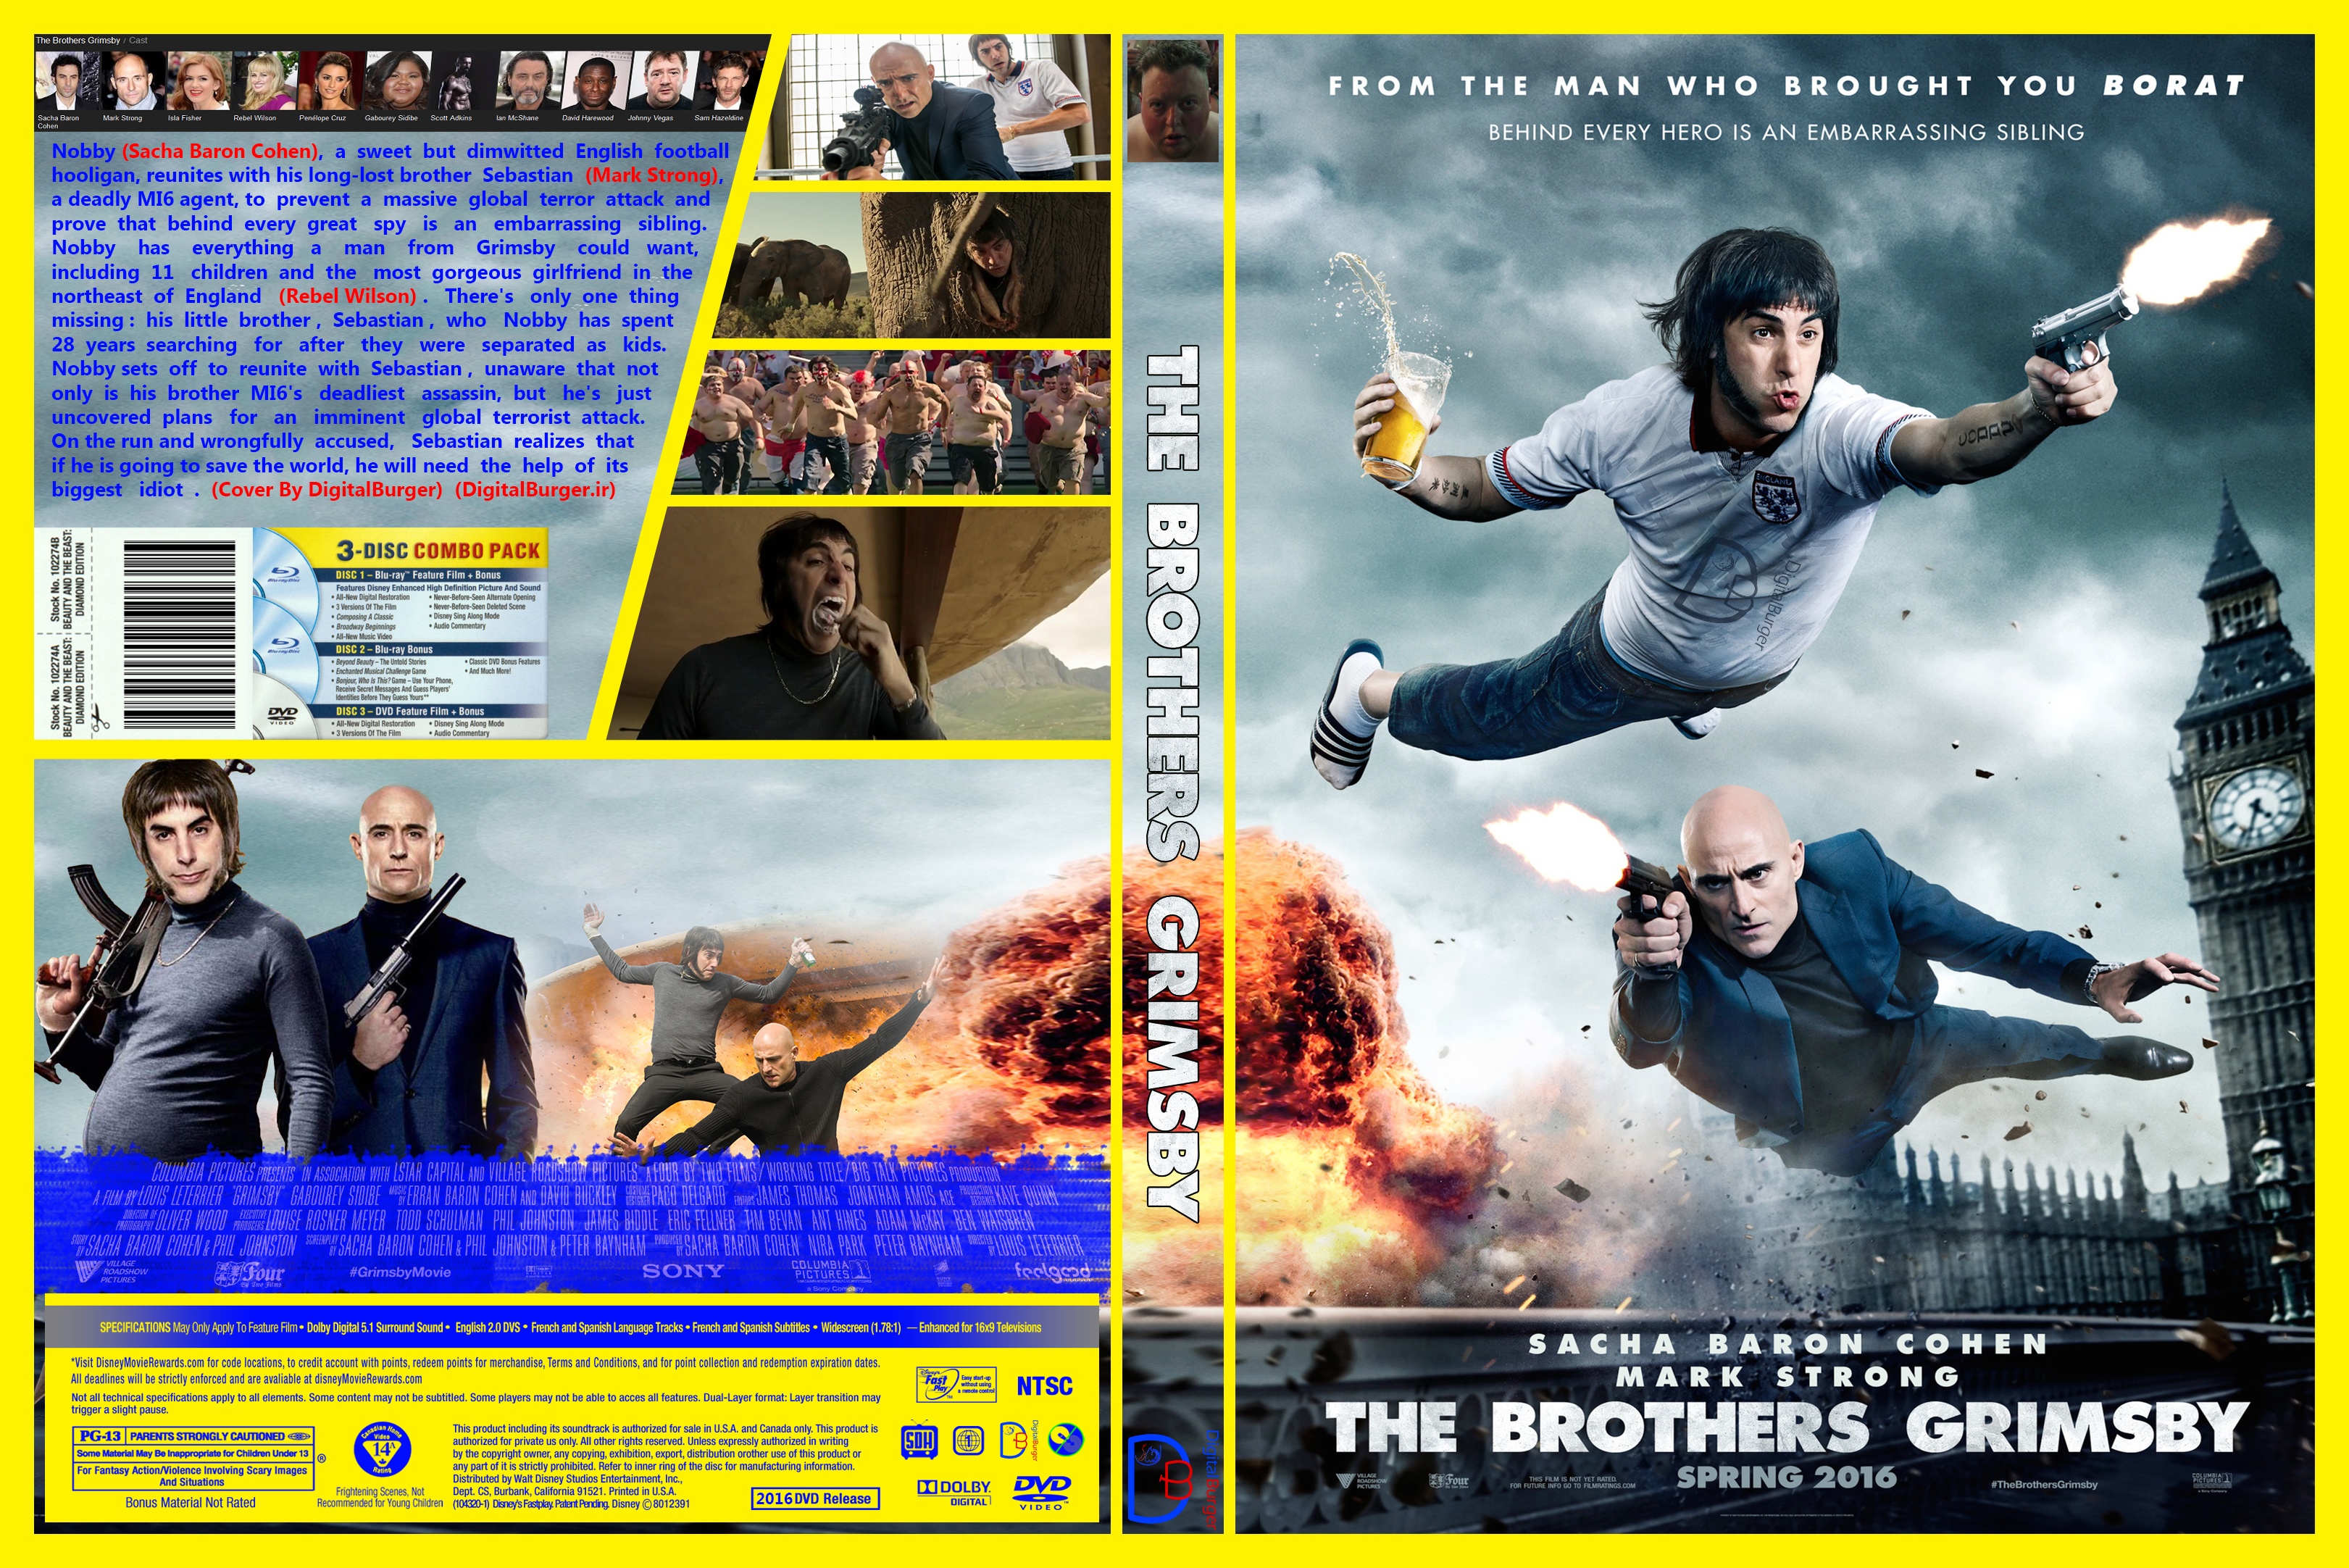 The Brothers Grimsby 2016 box cover